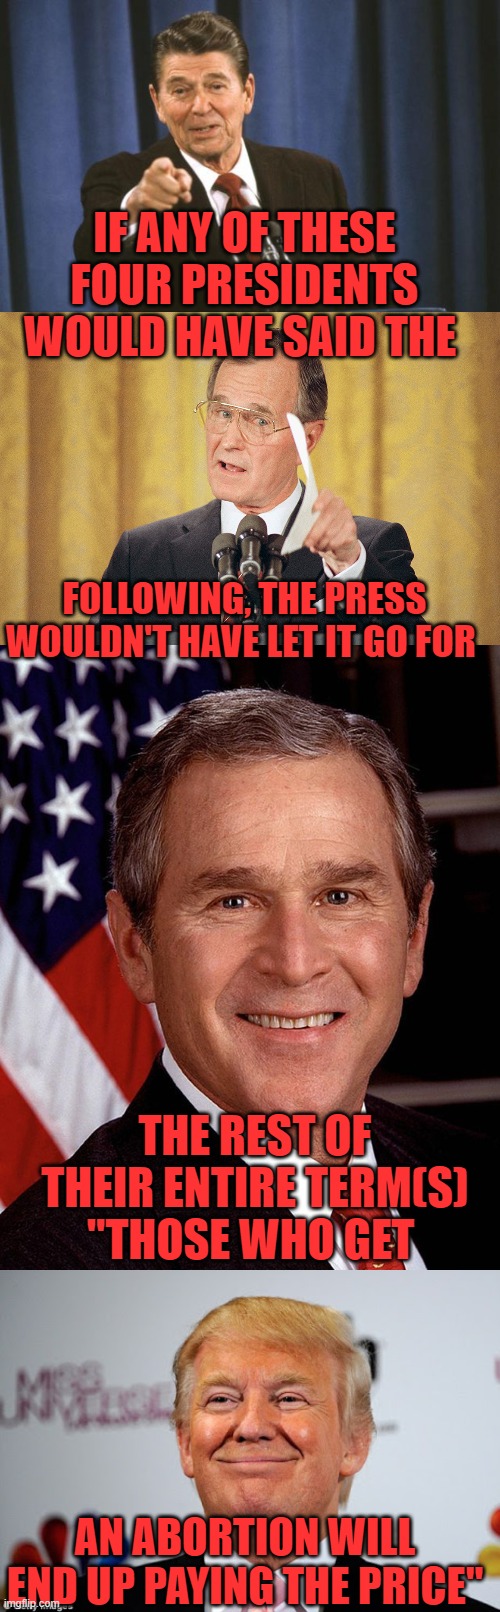 Biden loves to talk tough and the MSM always gives him a pass. | IF ANY OF THESE FOUR PRESIDENTS WOULD HAVE SAID THE; FOLLOWING, THE PRESS WOULDN'T HAVE LET IT GO FOR; THE REST OF THEIR ENTIRE TERM(S) "THOSE WHO GET; AN ABORTION WILL END UP PAYING THE PRICE" | image tagged in ronald reagan,george h w bush meme,george w bush,donald trump approves,biden,vaccination | made w/ Imgflip meme maker